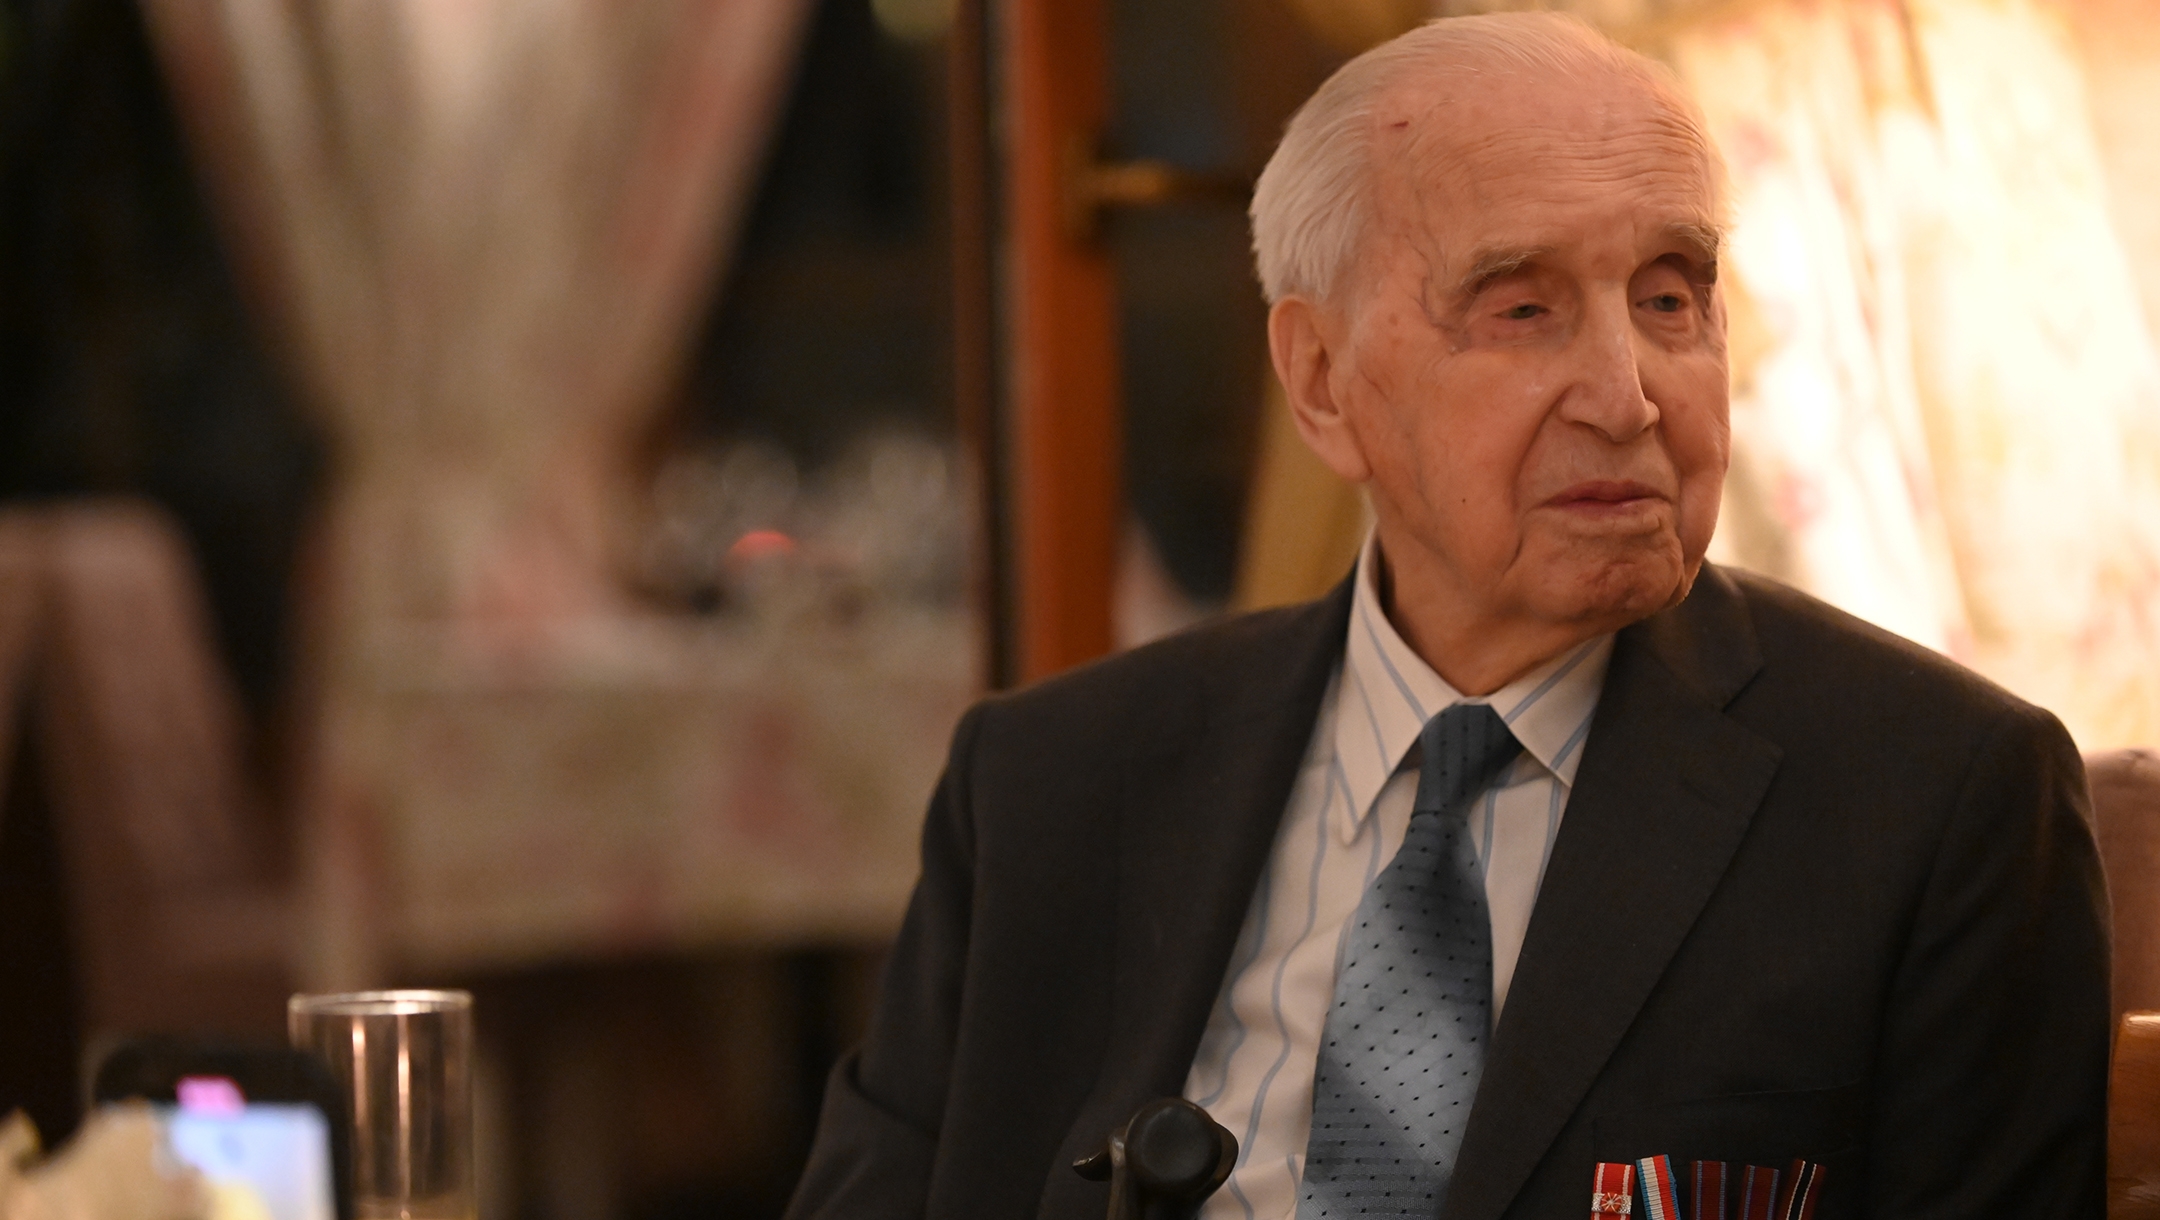 Jozef Walaszczyk, 100, who saved more than 50 Jews during the Holocaust, telling his story at a restaurant in Warsaw, Poland on Jan. 28, 2020. (Cnaan Liphshiz)